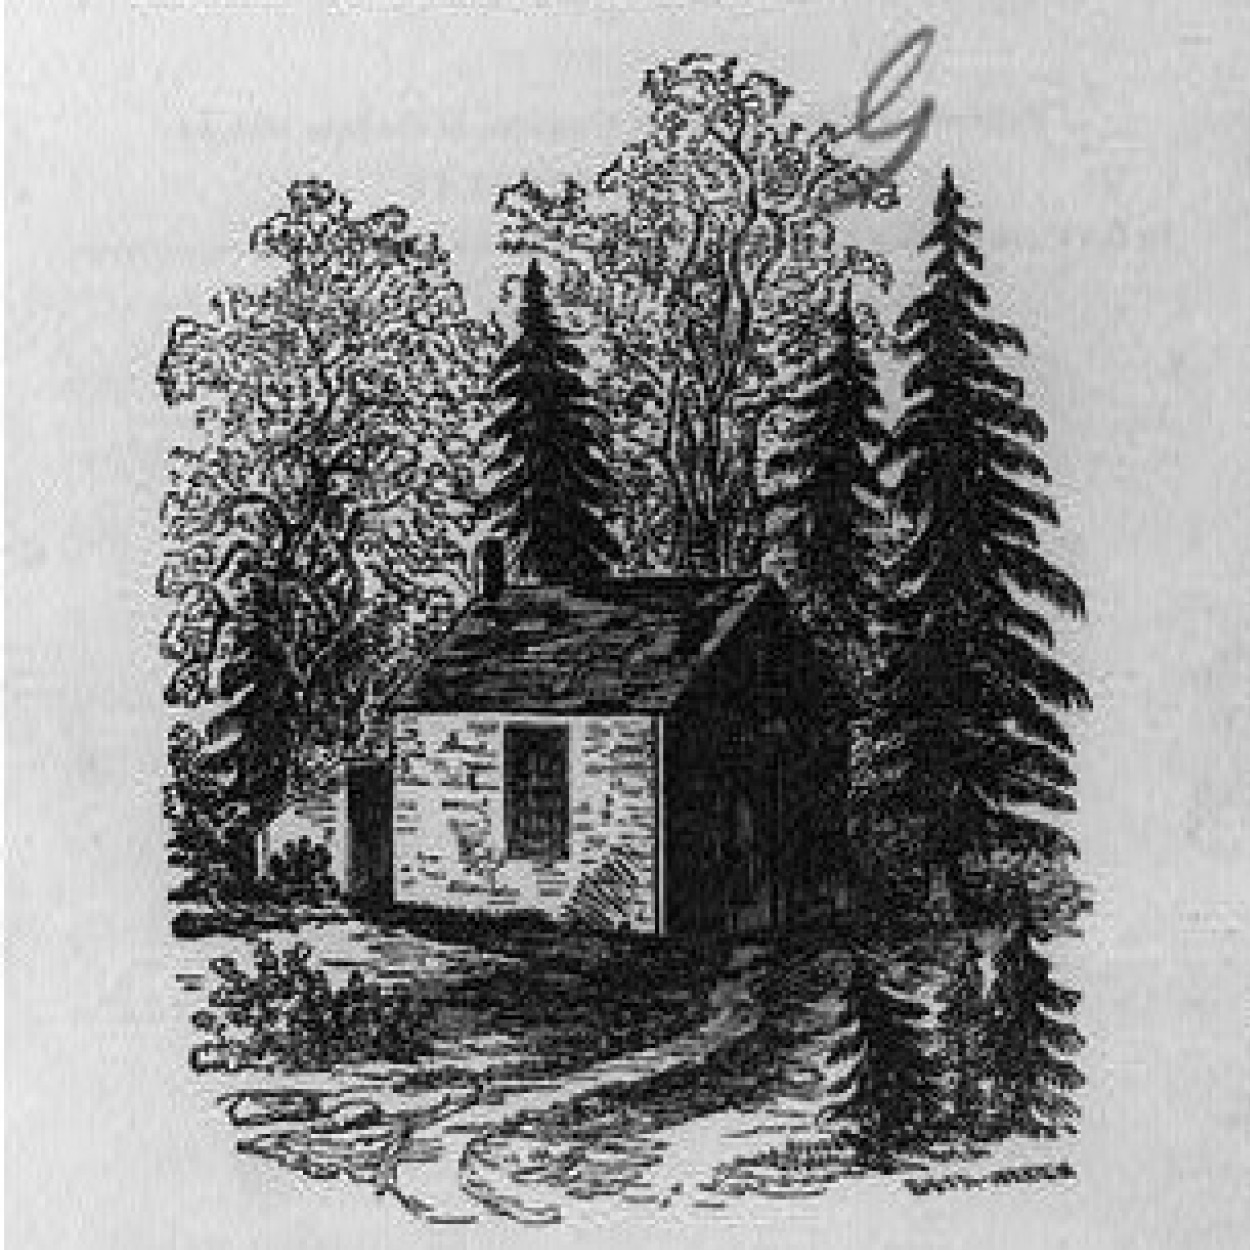 Image from the title page of Walden by Henry David Thoreau